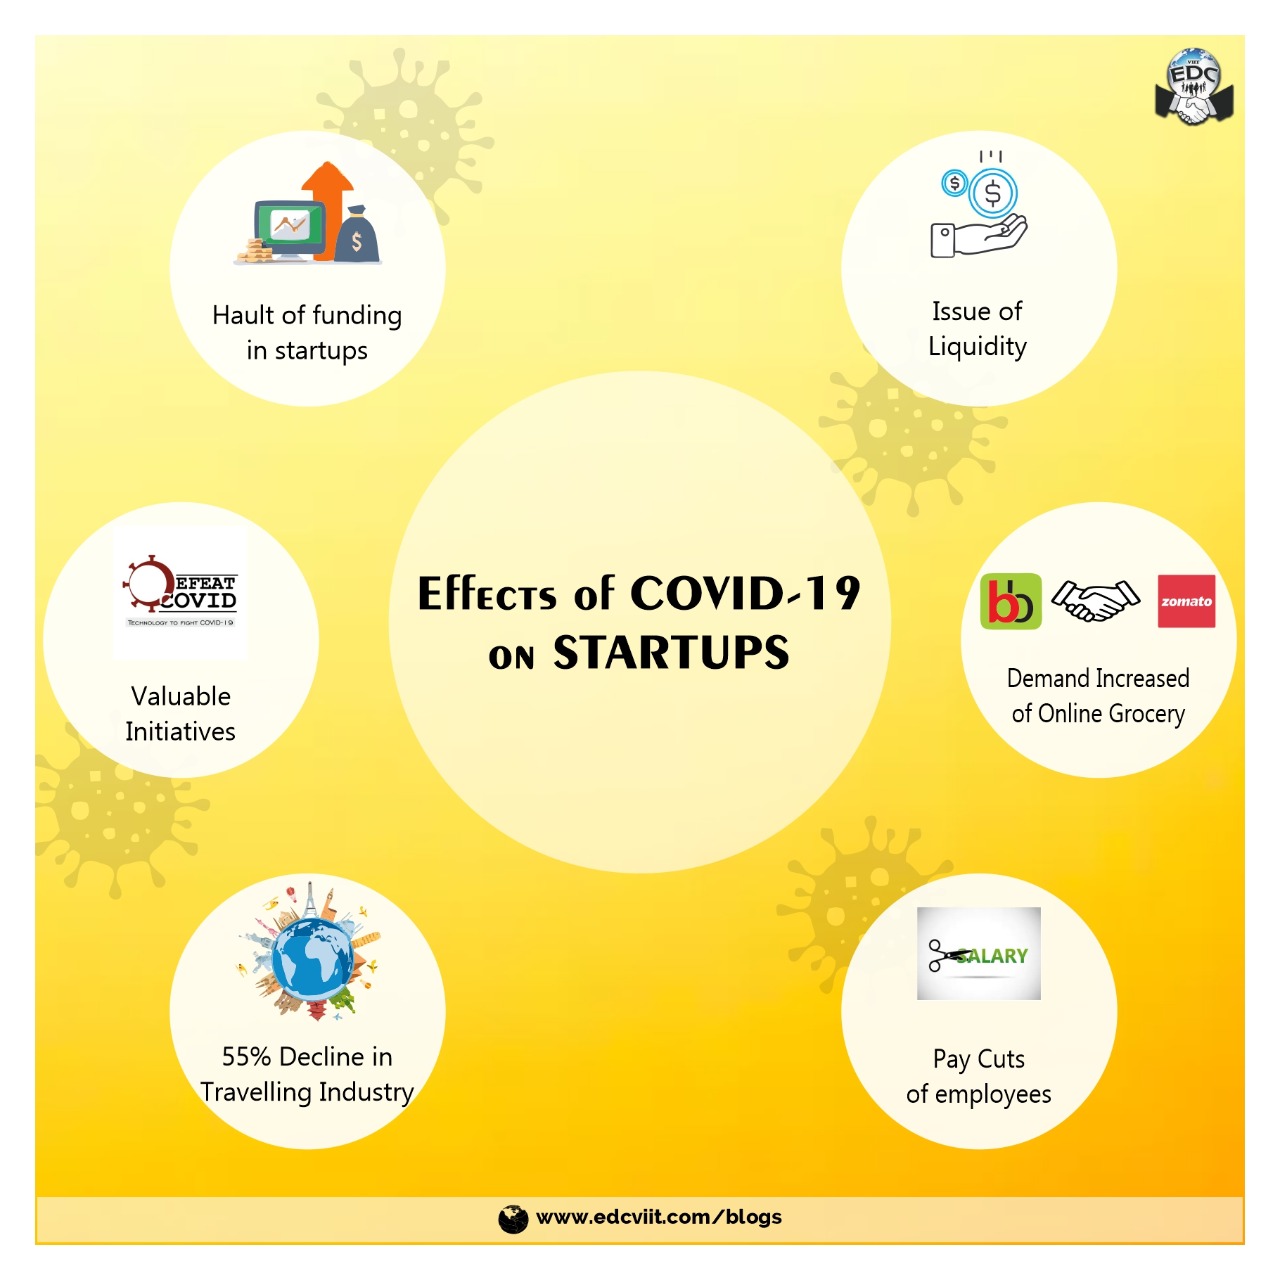 IMPACT OF COVID-19 ON STARTUPS